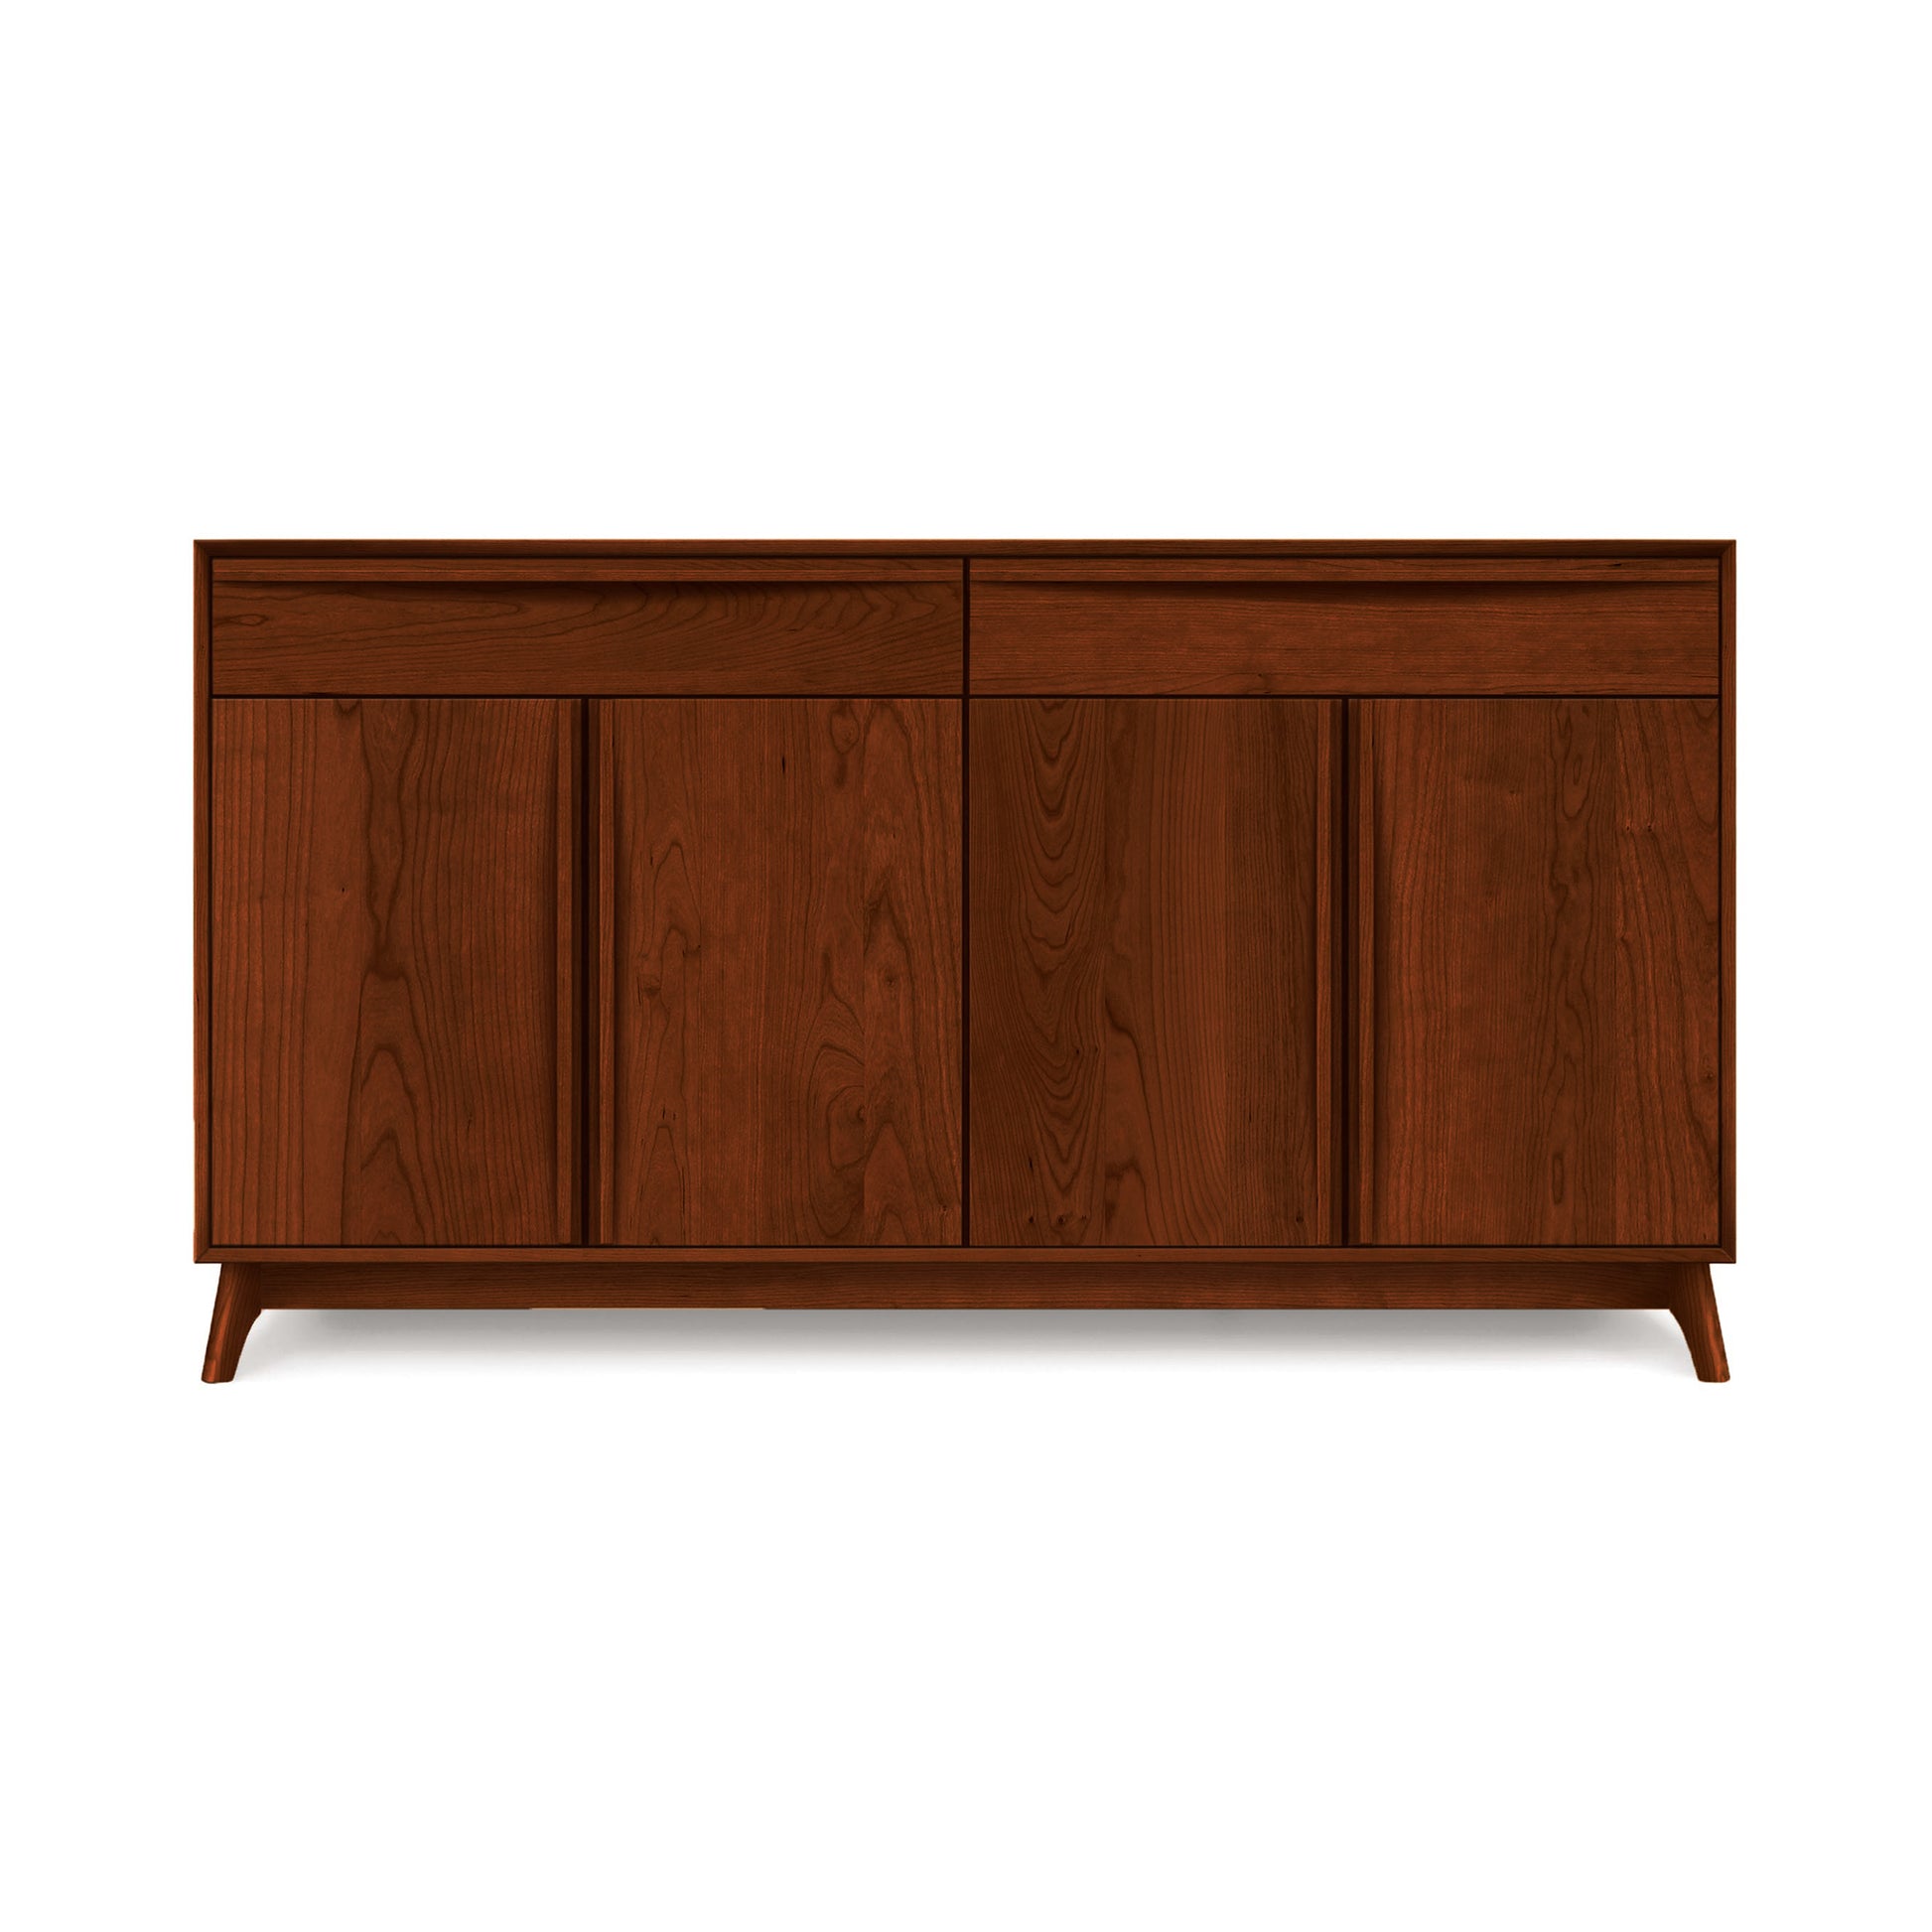 A handcrafted Copeland Furniture Catalina 2-Drawers, 4-Door Buffet, a solid wood dining furniture piece with closed doors on a plain background.